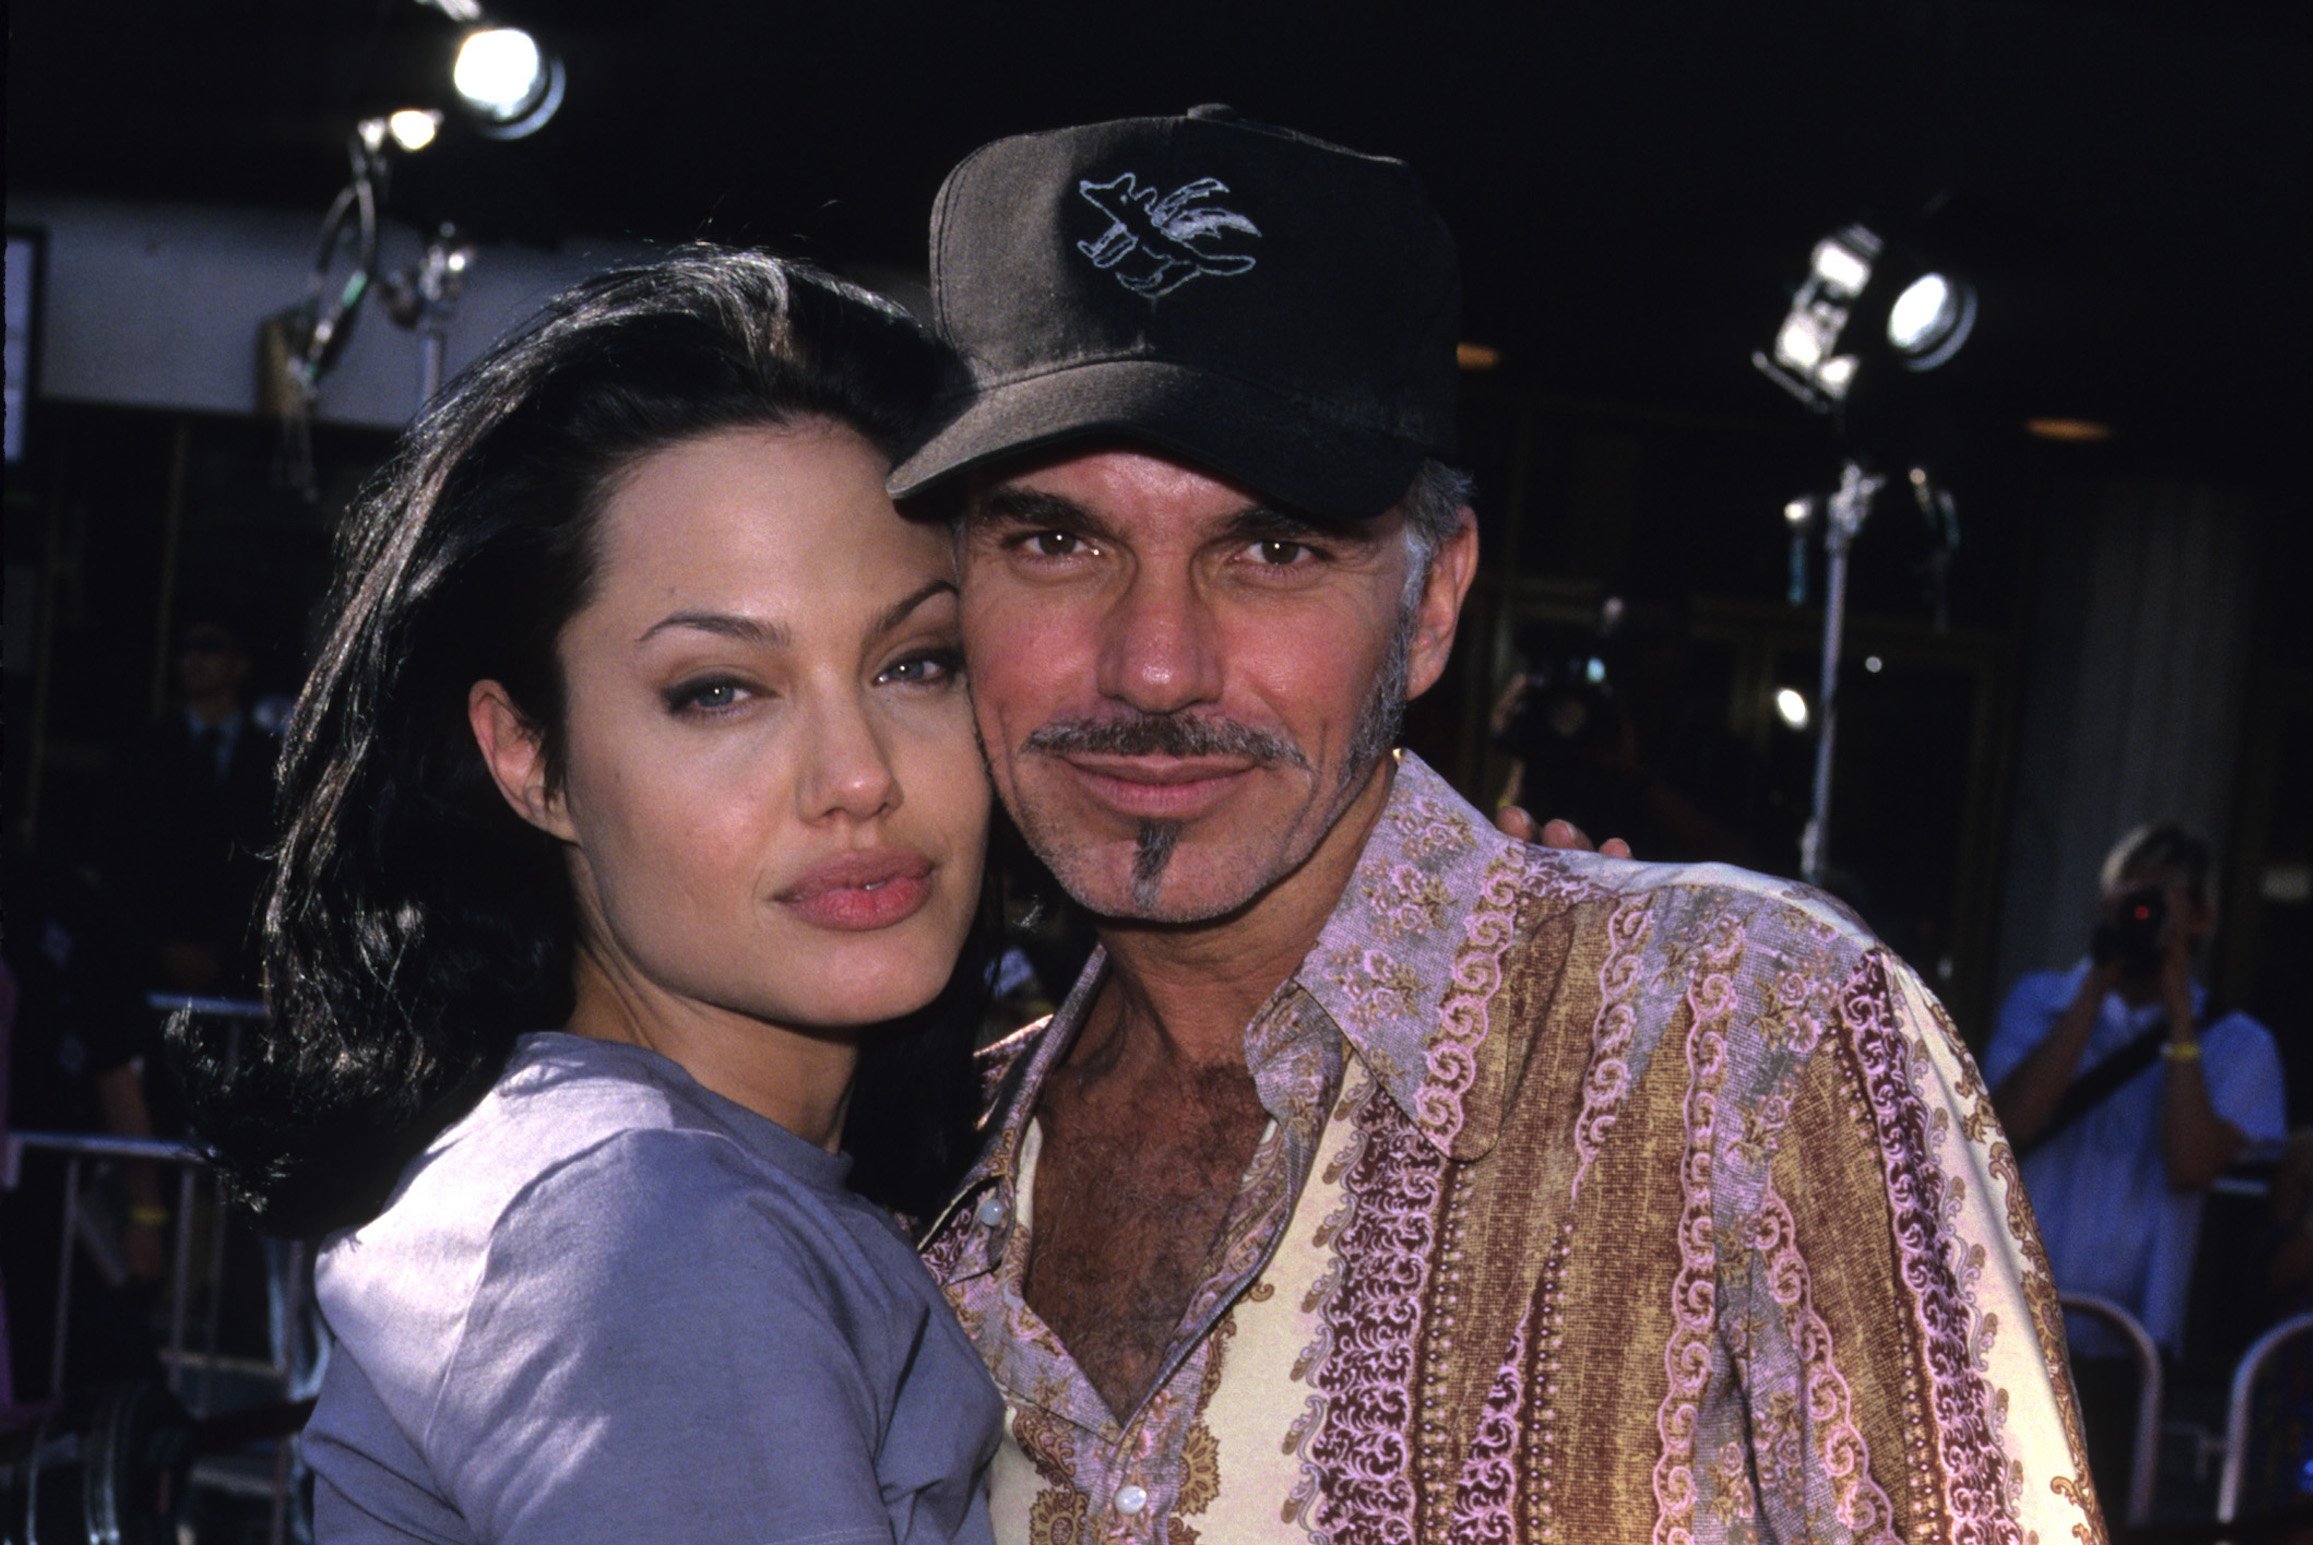 Angelina Jolie and Billy Bob Thornton Had Sex in the Car On the Way to the Gone In 60 Seconds Premiere pic